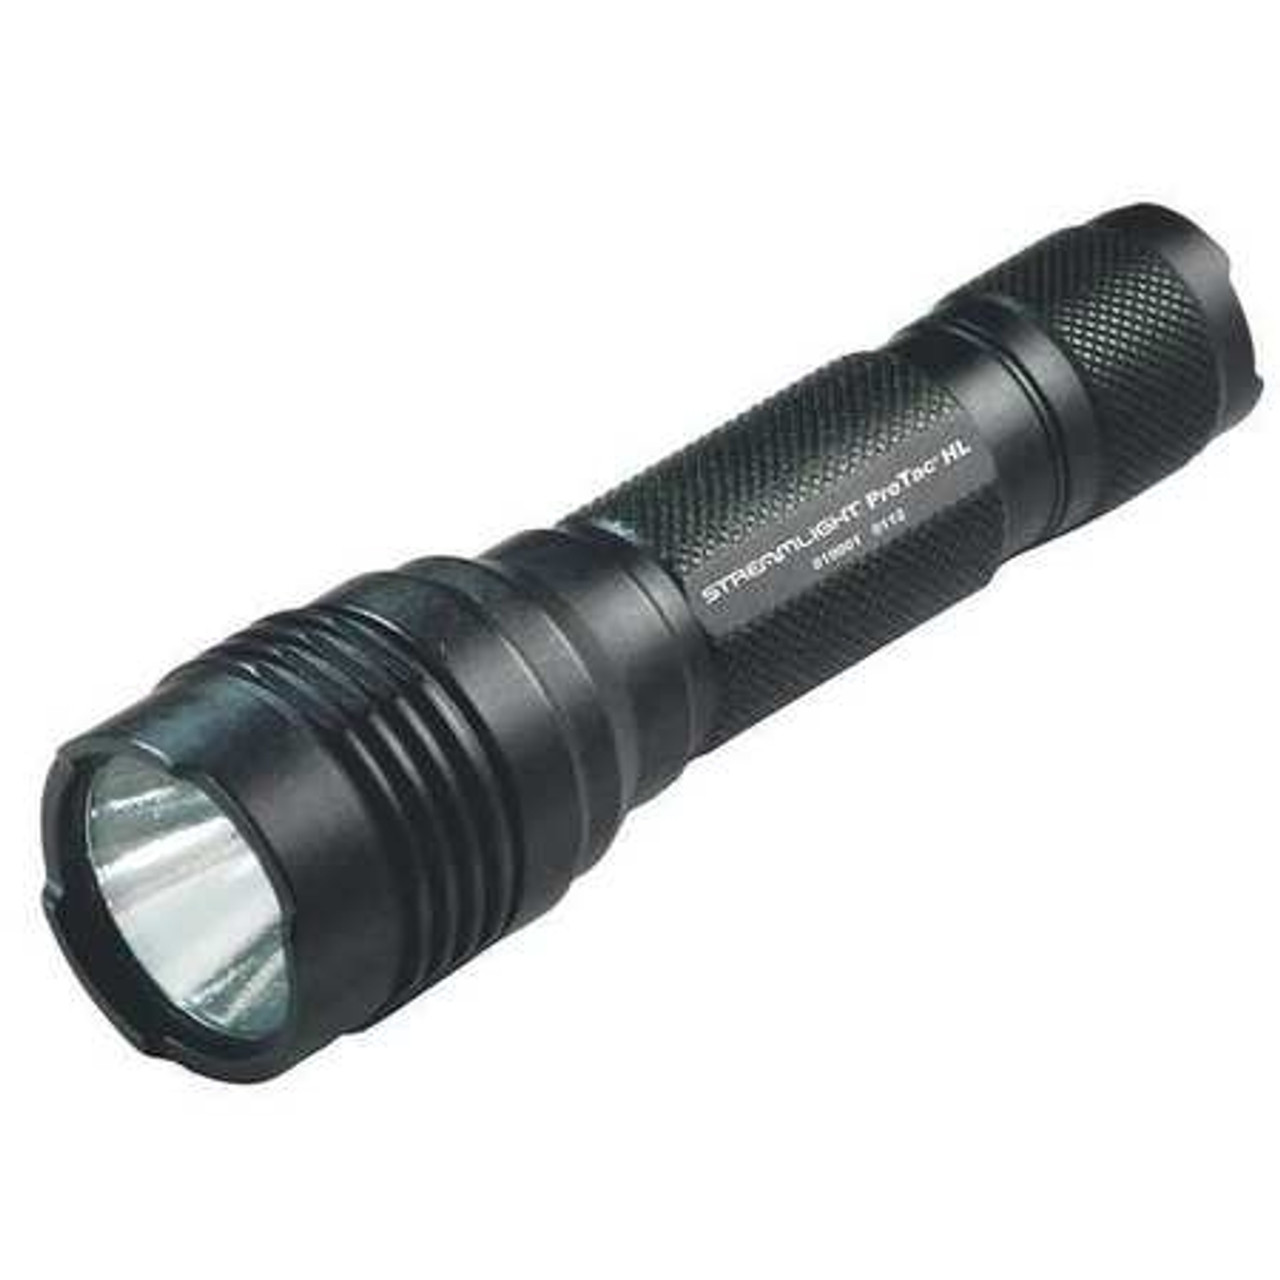 Streamlight High Lumen Tactical - Midwest Industries, Inc.